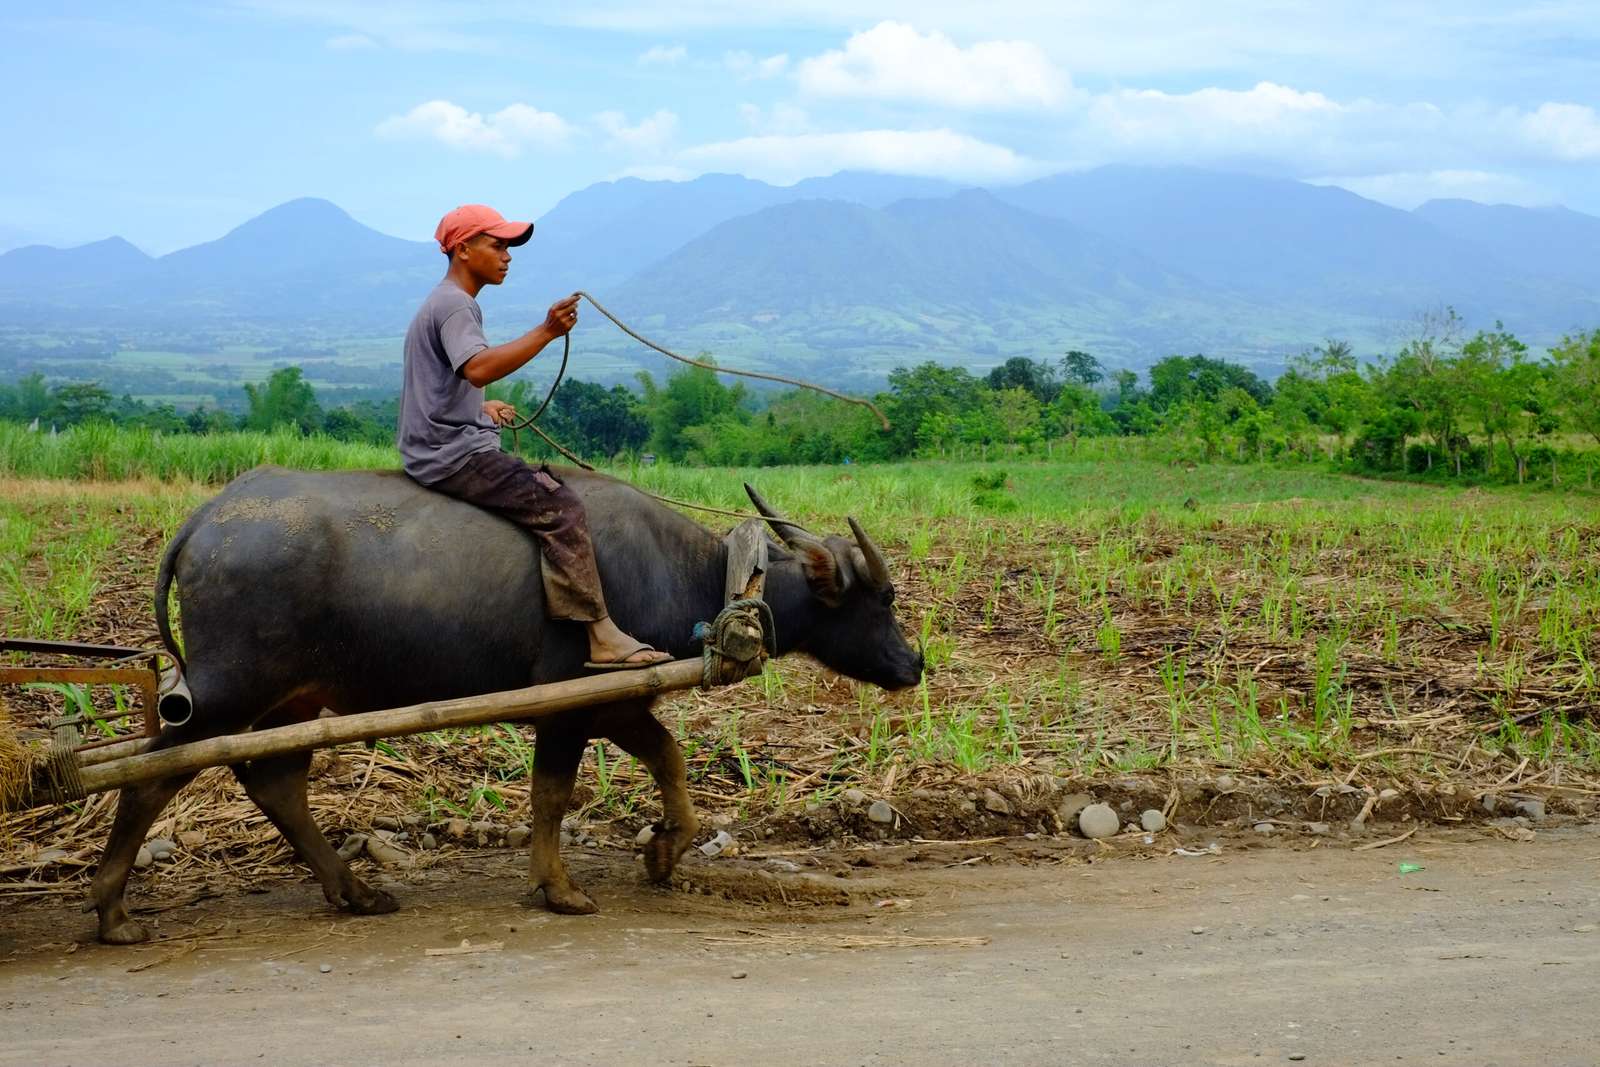 farmer in the philippines puzzle online from photo